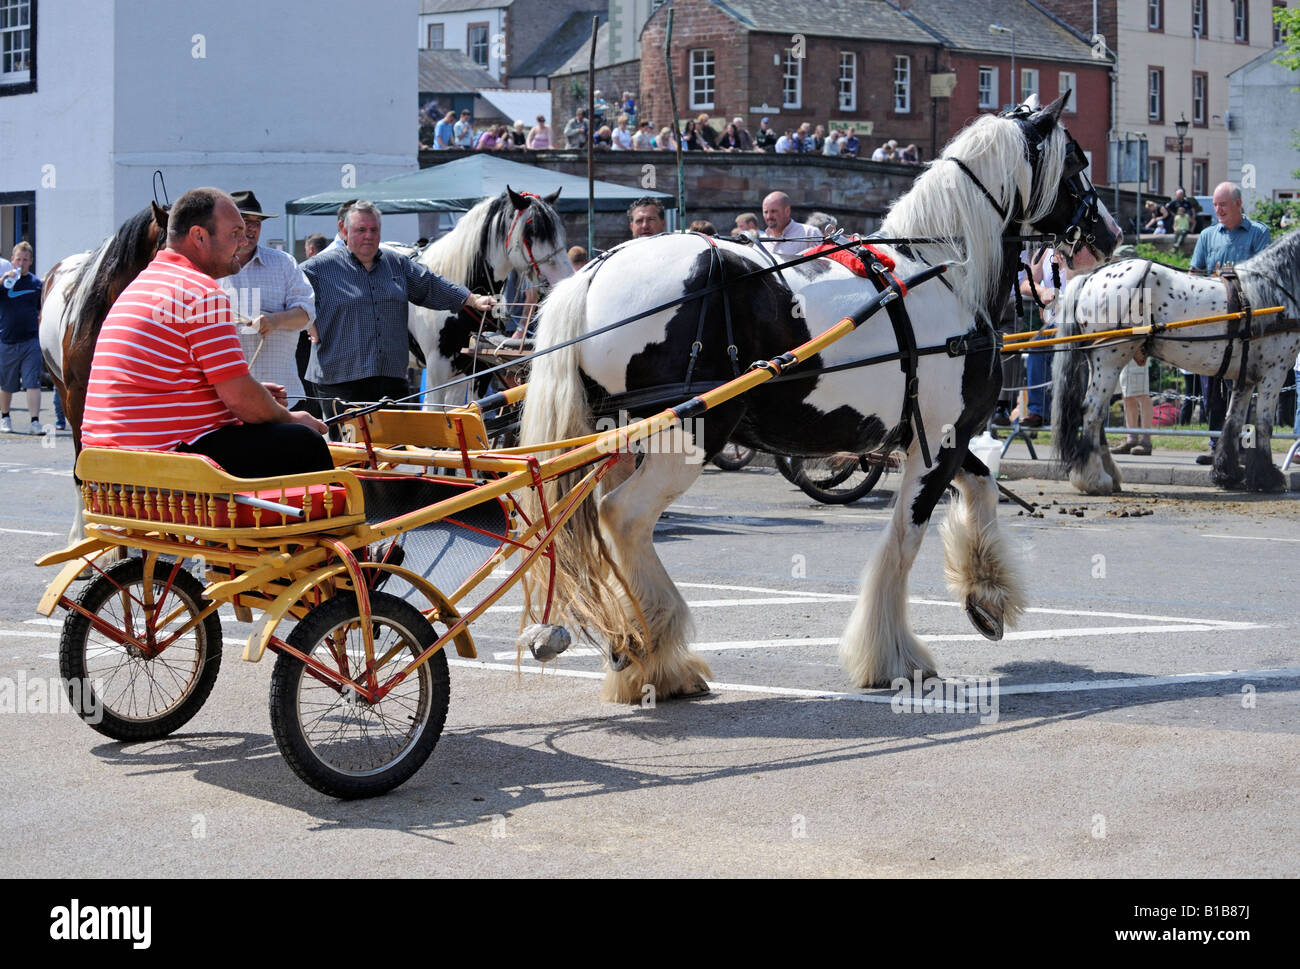 Gypsy travellers at Appleby Horse Fair. Appleby-in-Westmorland, Cumbria, England, United Kingdom, Europe. Stock Photo